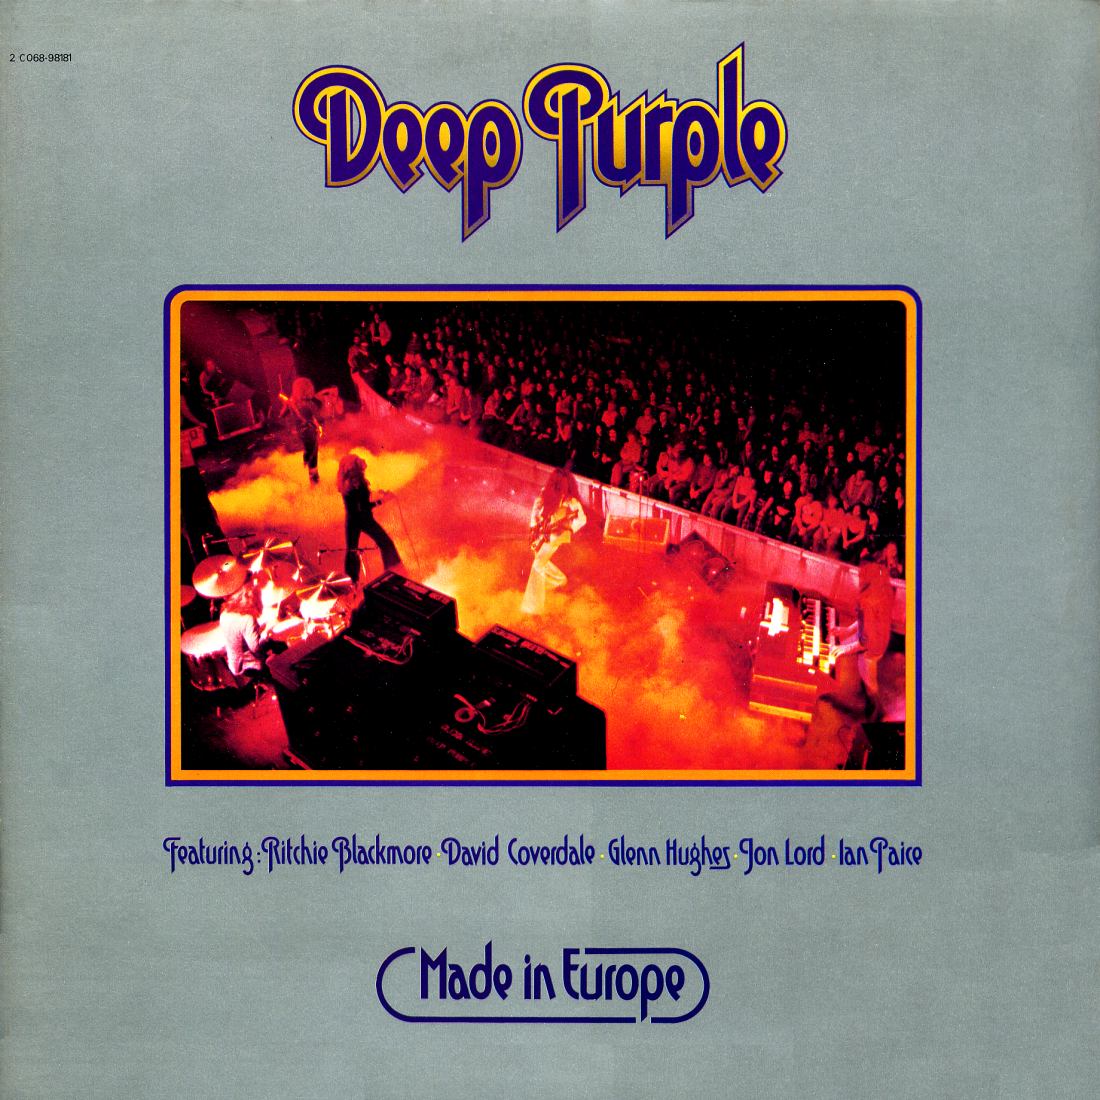 Deep Purple_Made in Europe_1a